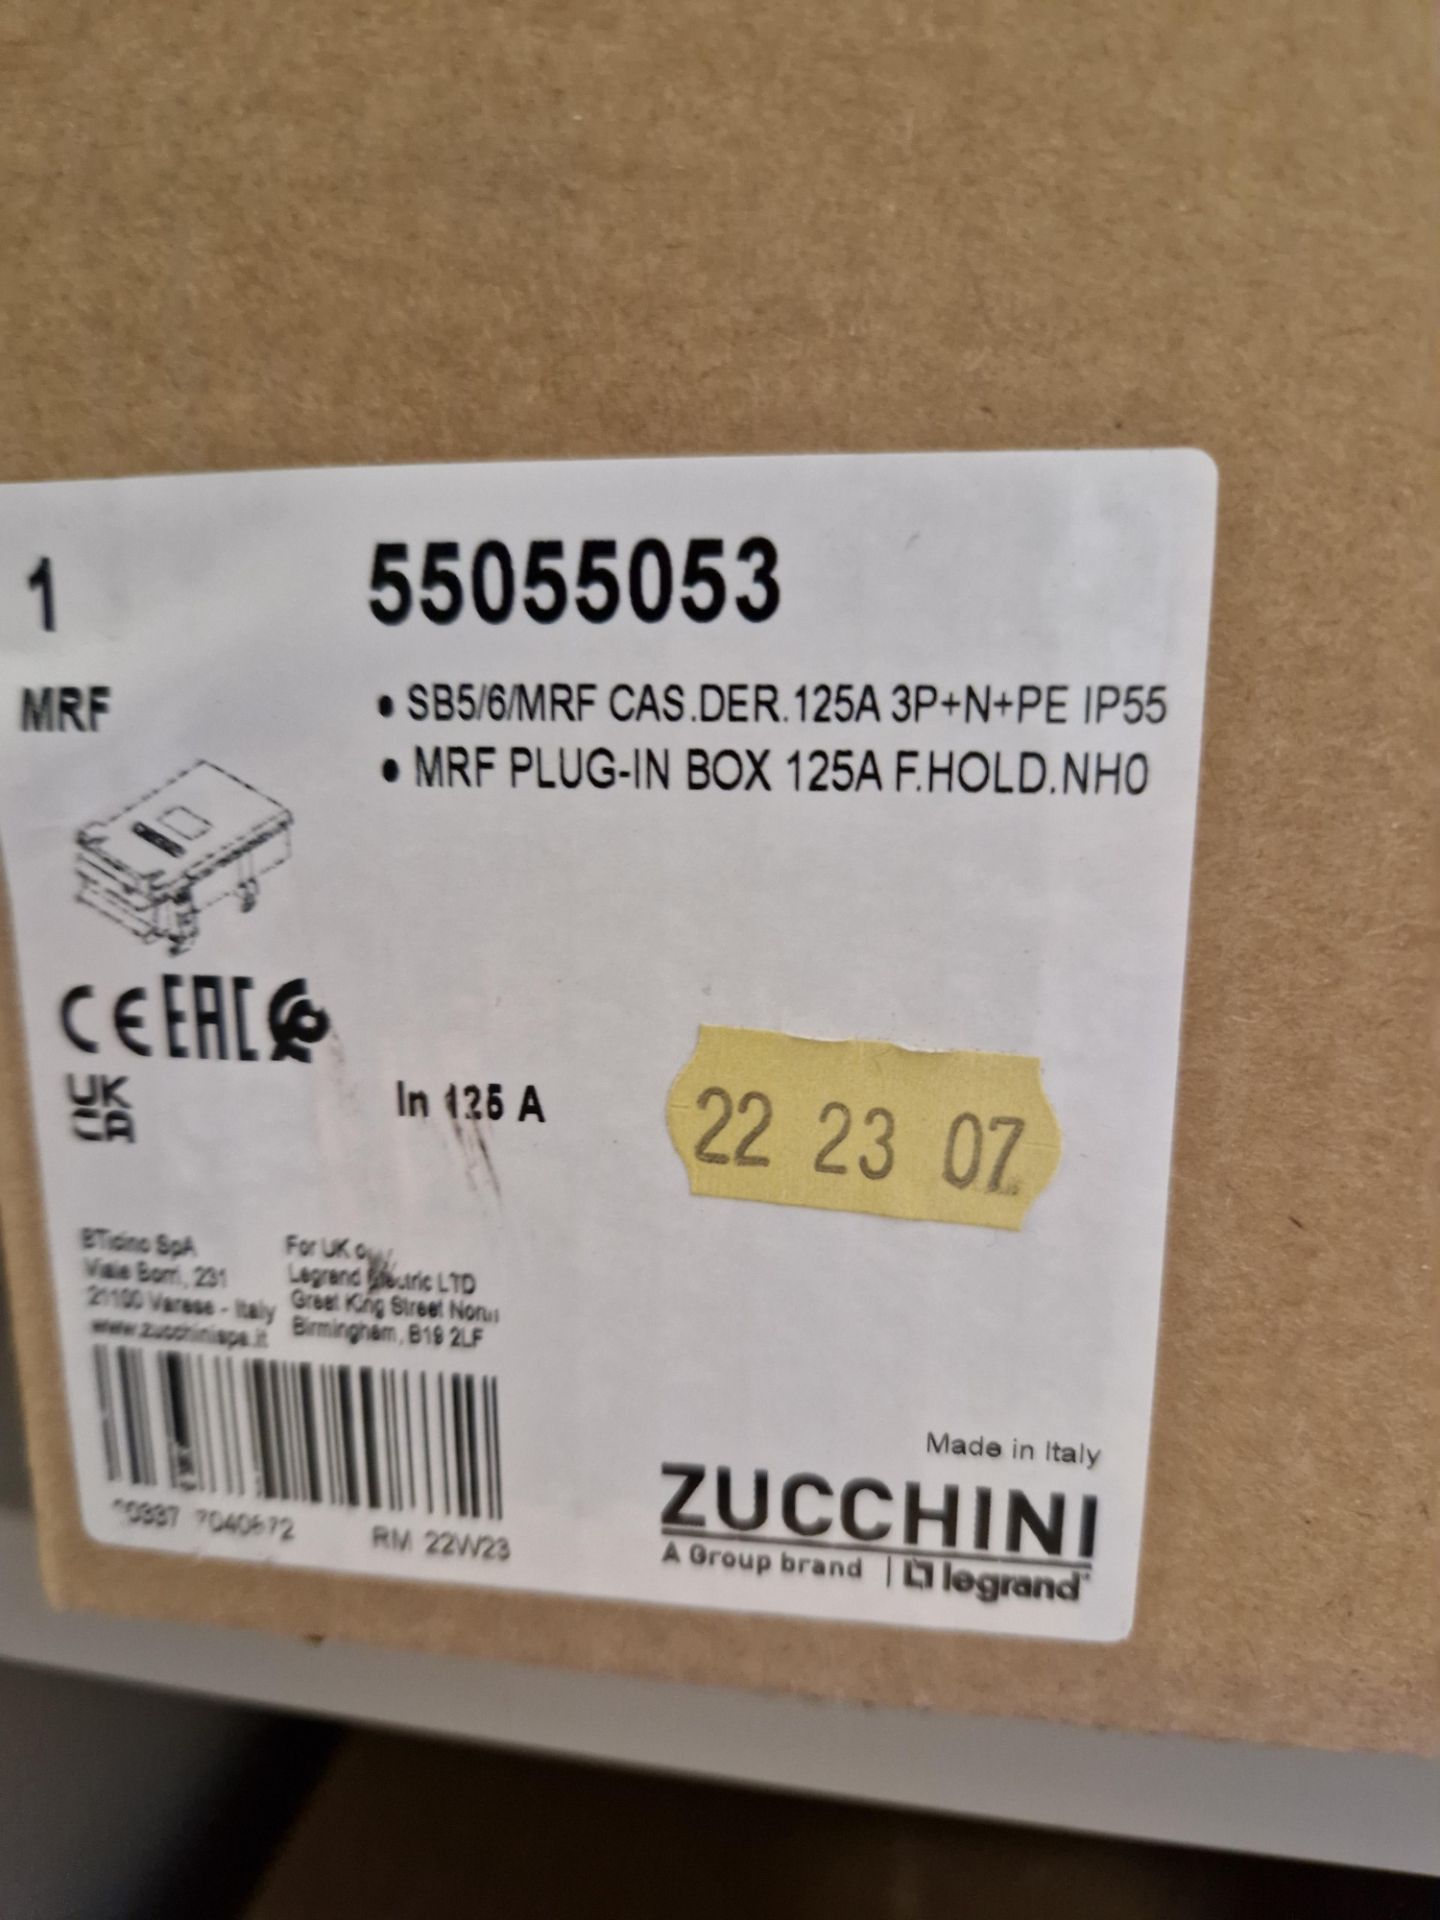 Three Boxes of Zucchini 55055053 MRF 125A F.HOLD.NH0 PLUG-IN Boxes Please read the following - Image 2 of 2